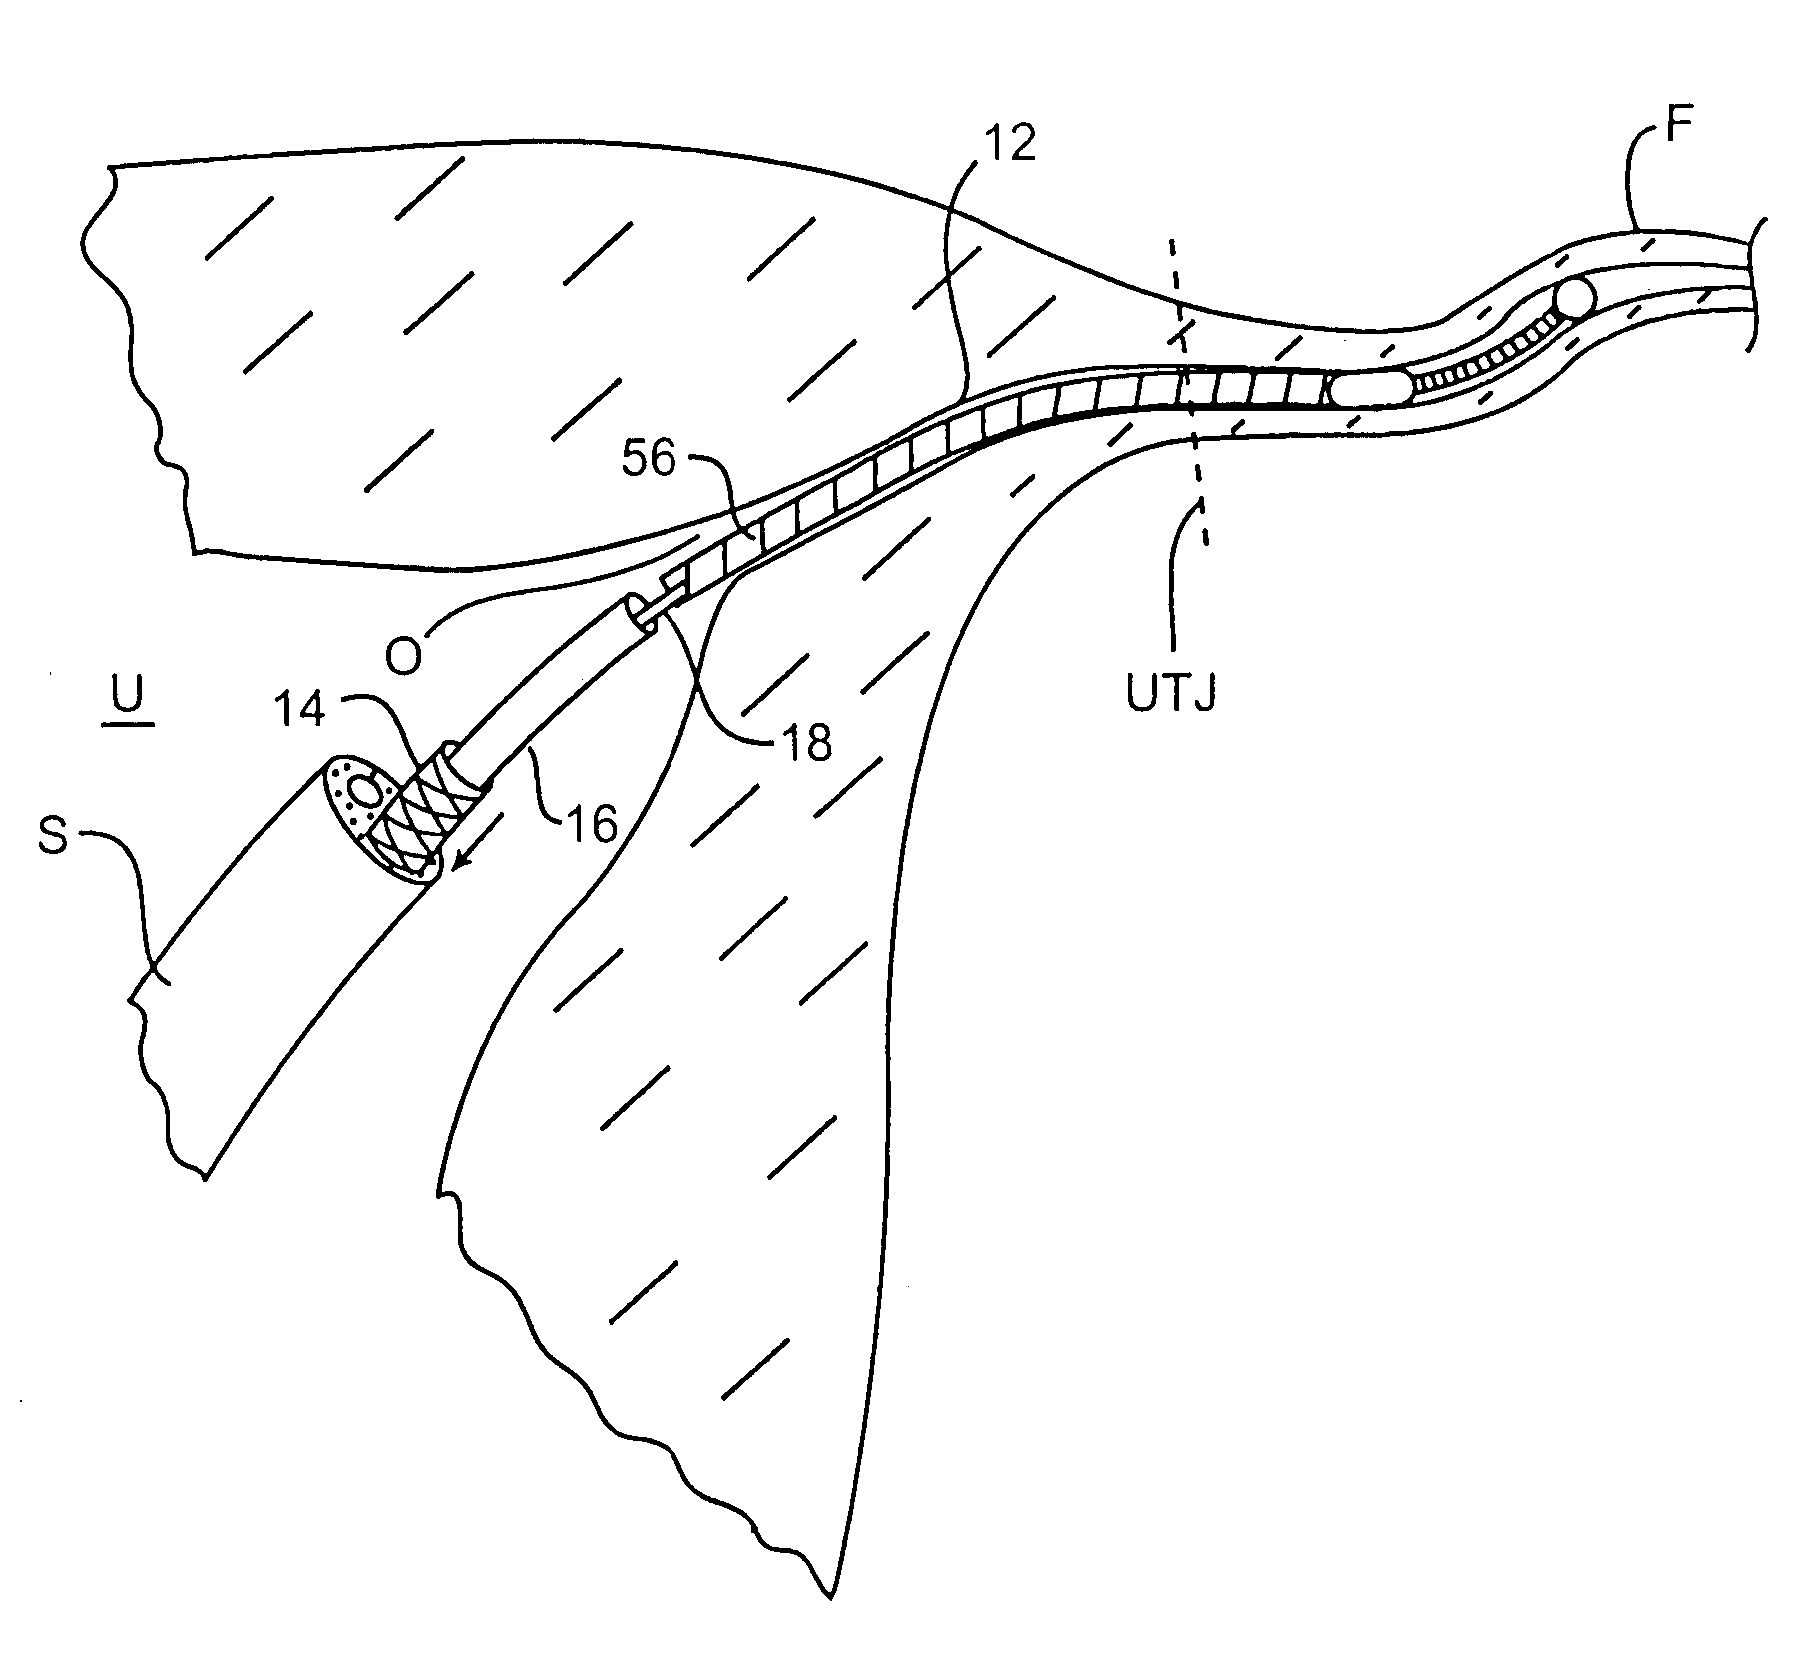 Insertion/deployment catheter system for intrafallopian contraception